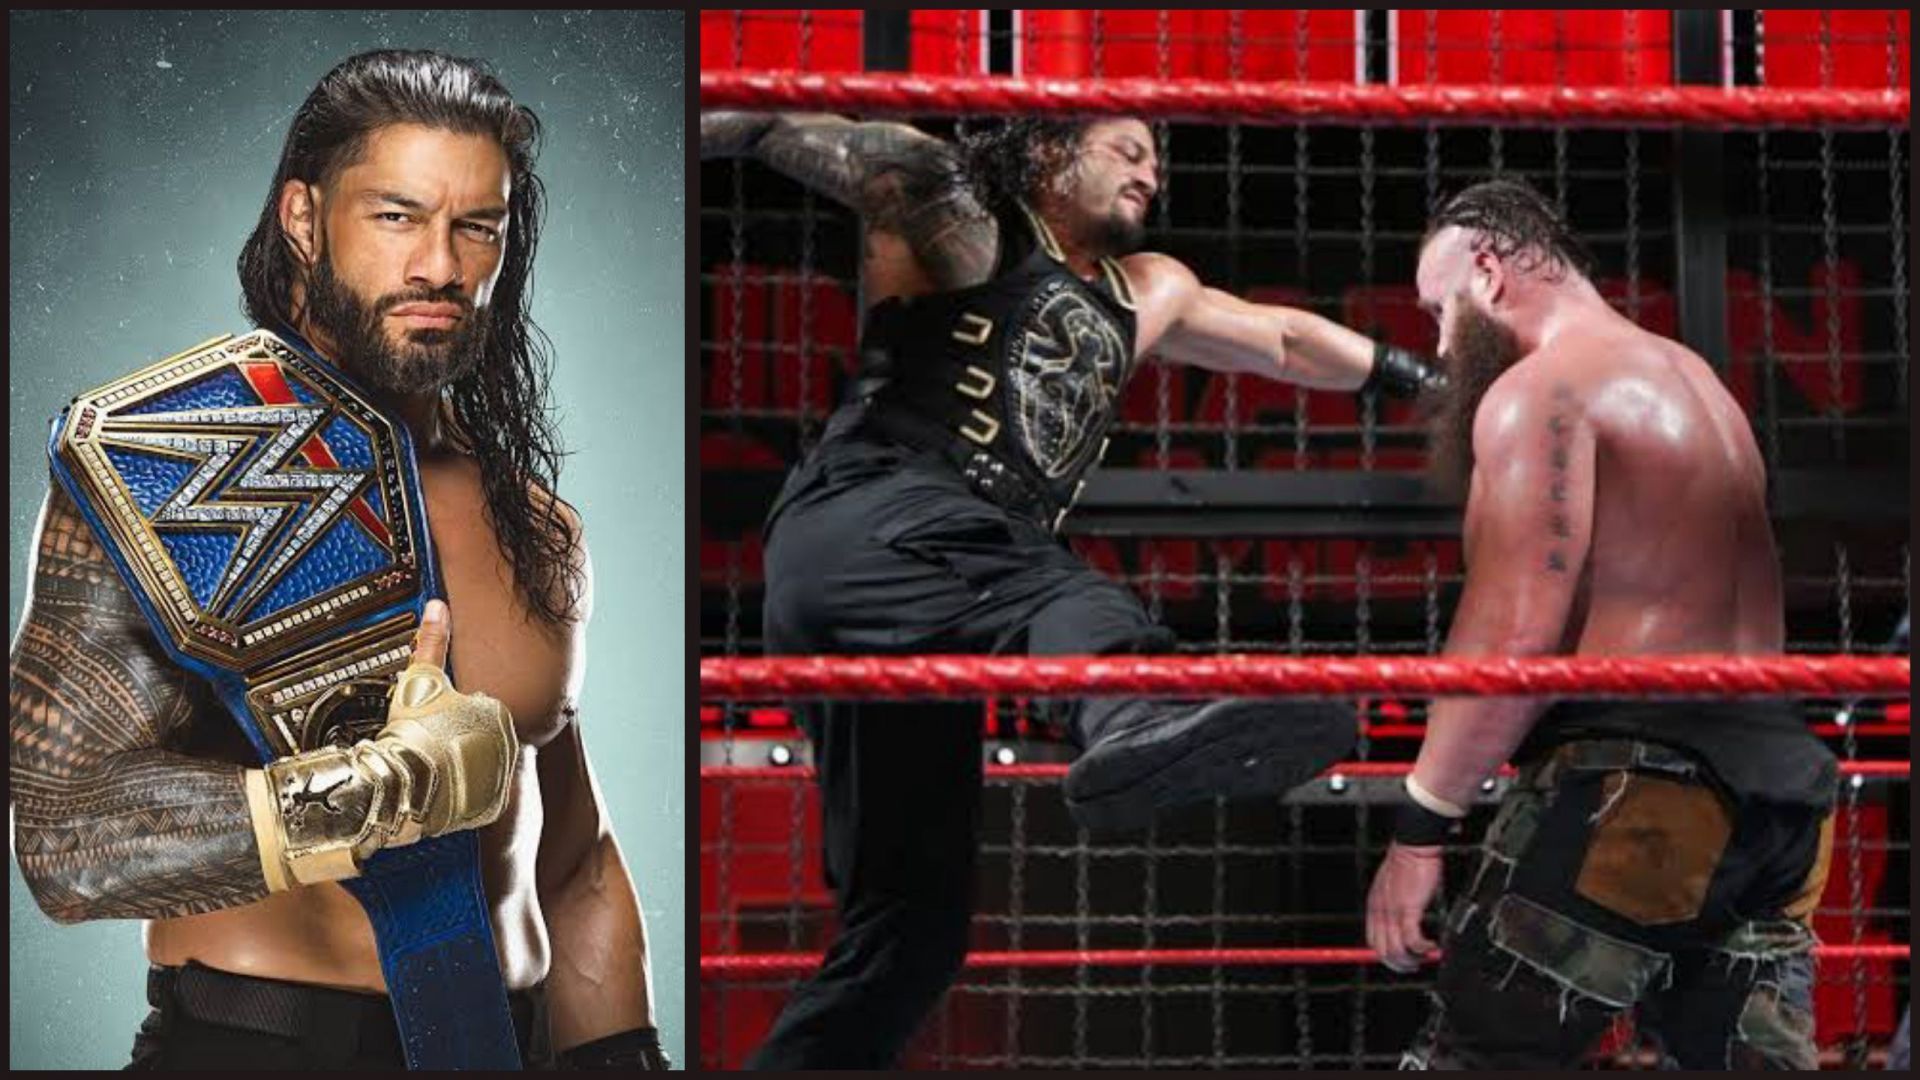 Roman Reigns has contested four matches at Elimination Chamber